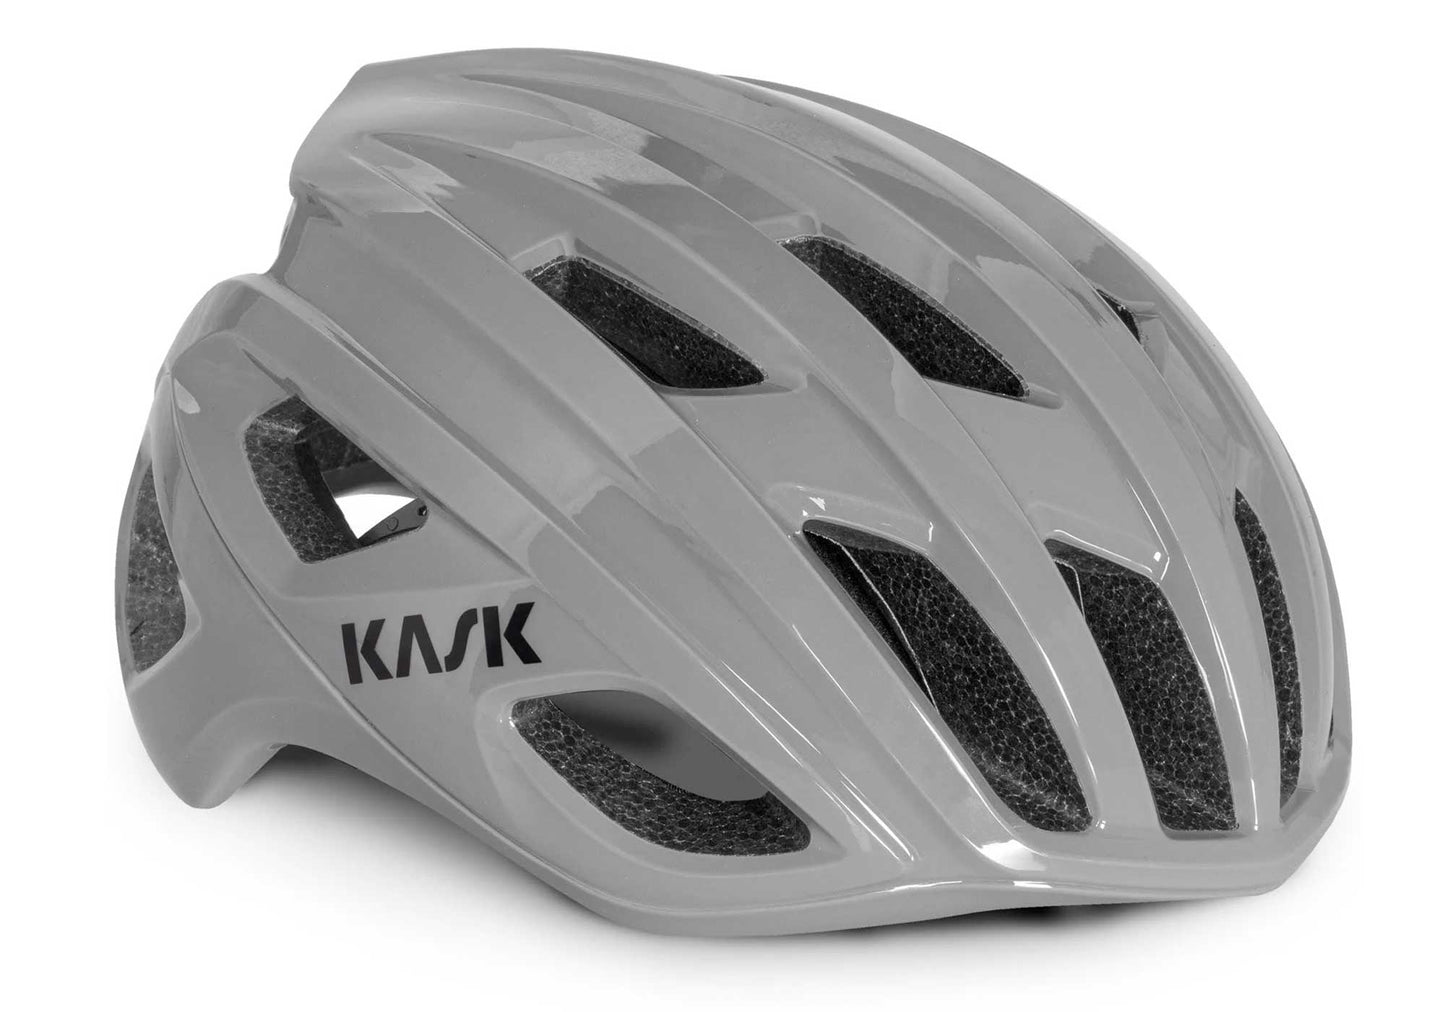 Kask Unisex Mojito 3 Road Cycling Helmet, Grey, buy online at Woolys Wheels with free delivery